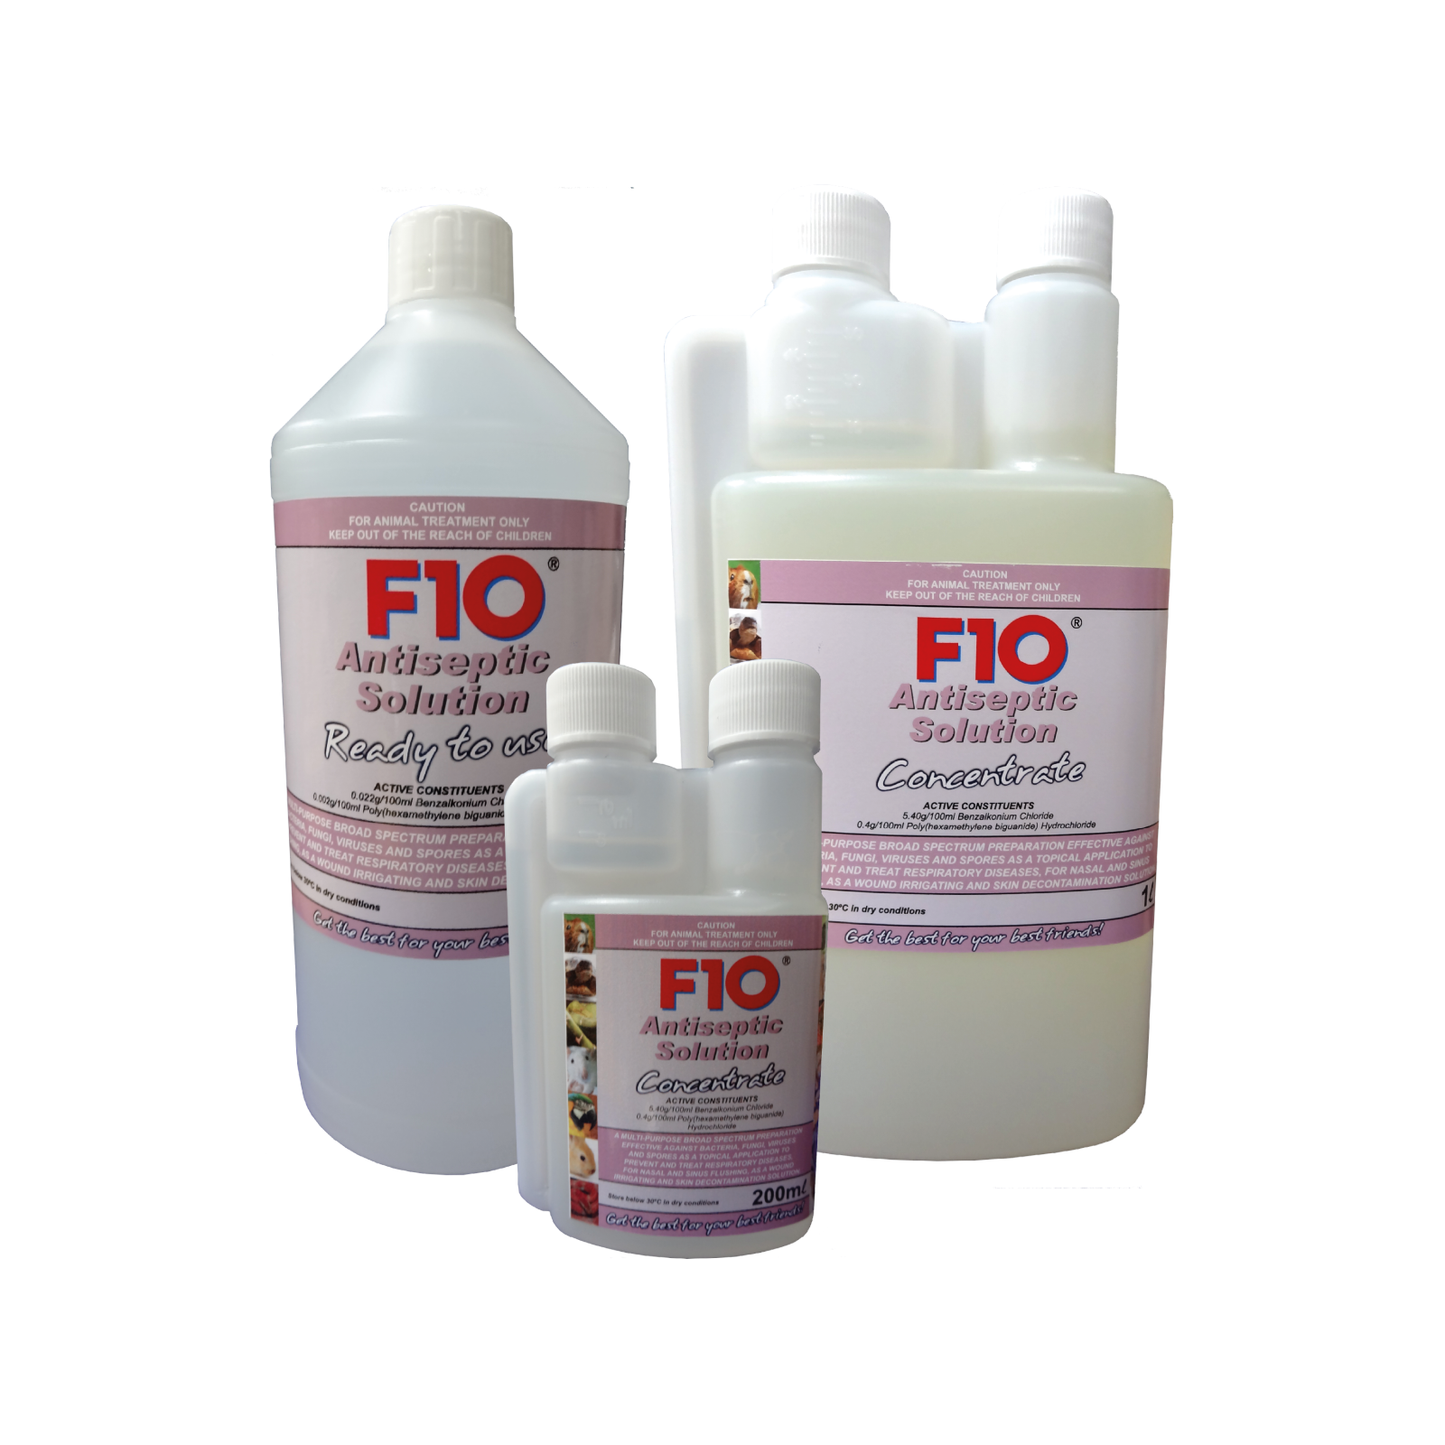 1 litre and 200ml bottles of F10 Antiseptic Solution Concentrate, and a 1 litre bottle F10 Antiseptic Solution Ready to Use